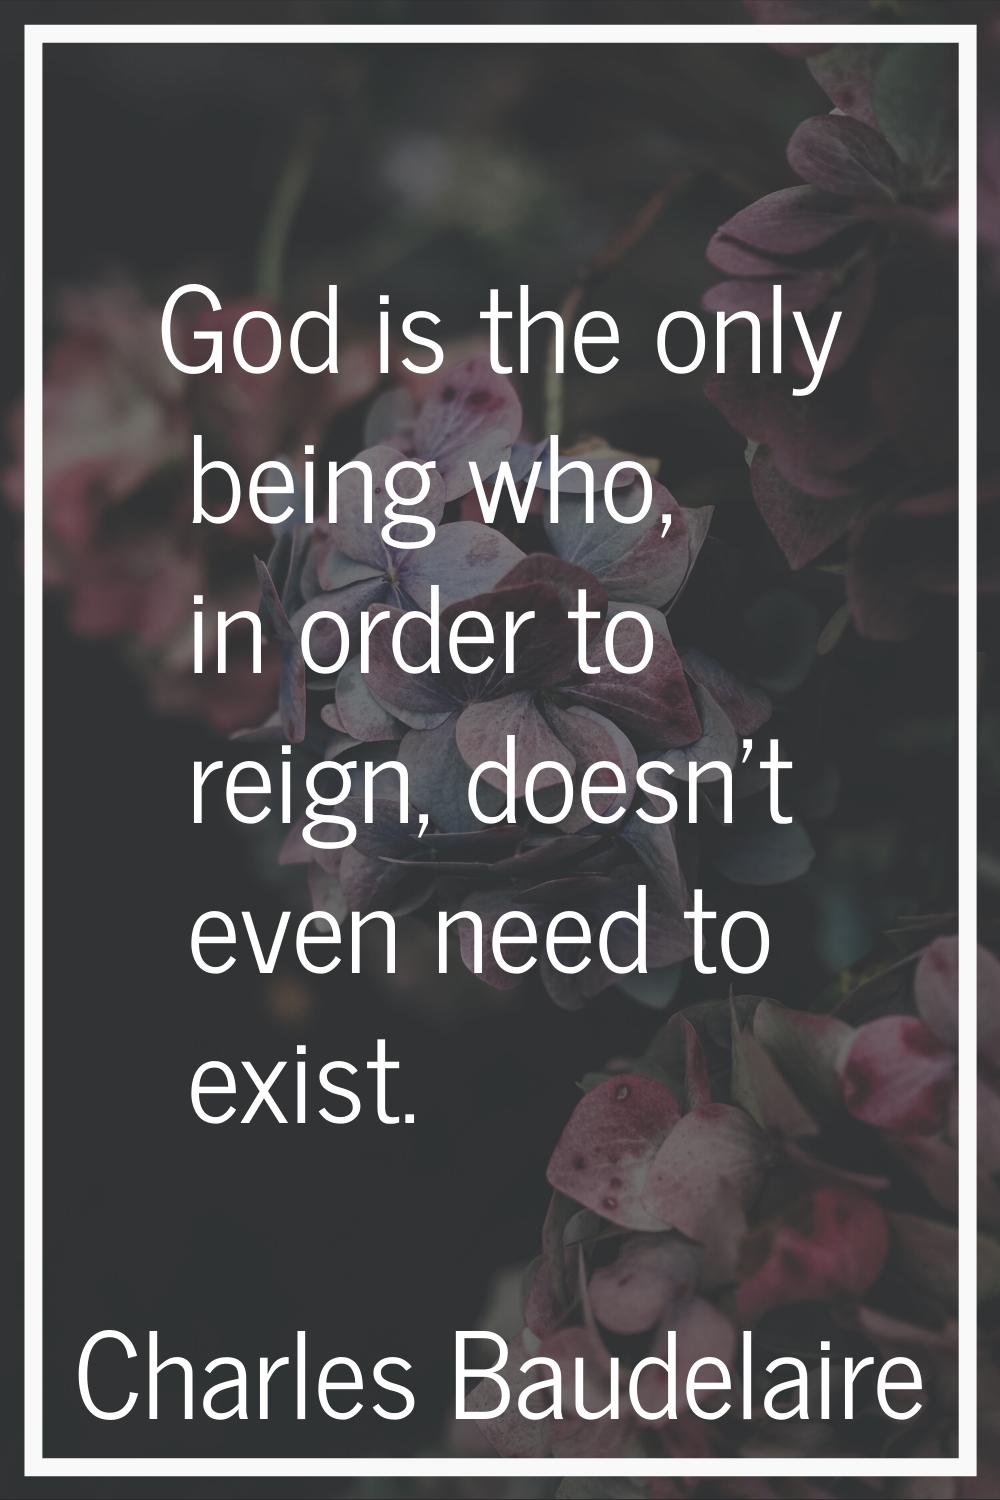 God is the only being who, in order to reign, doesn't even need to exist.